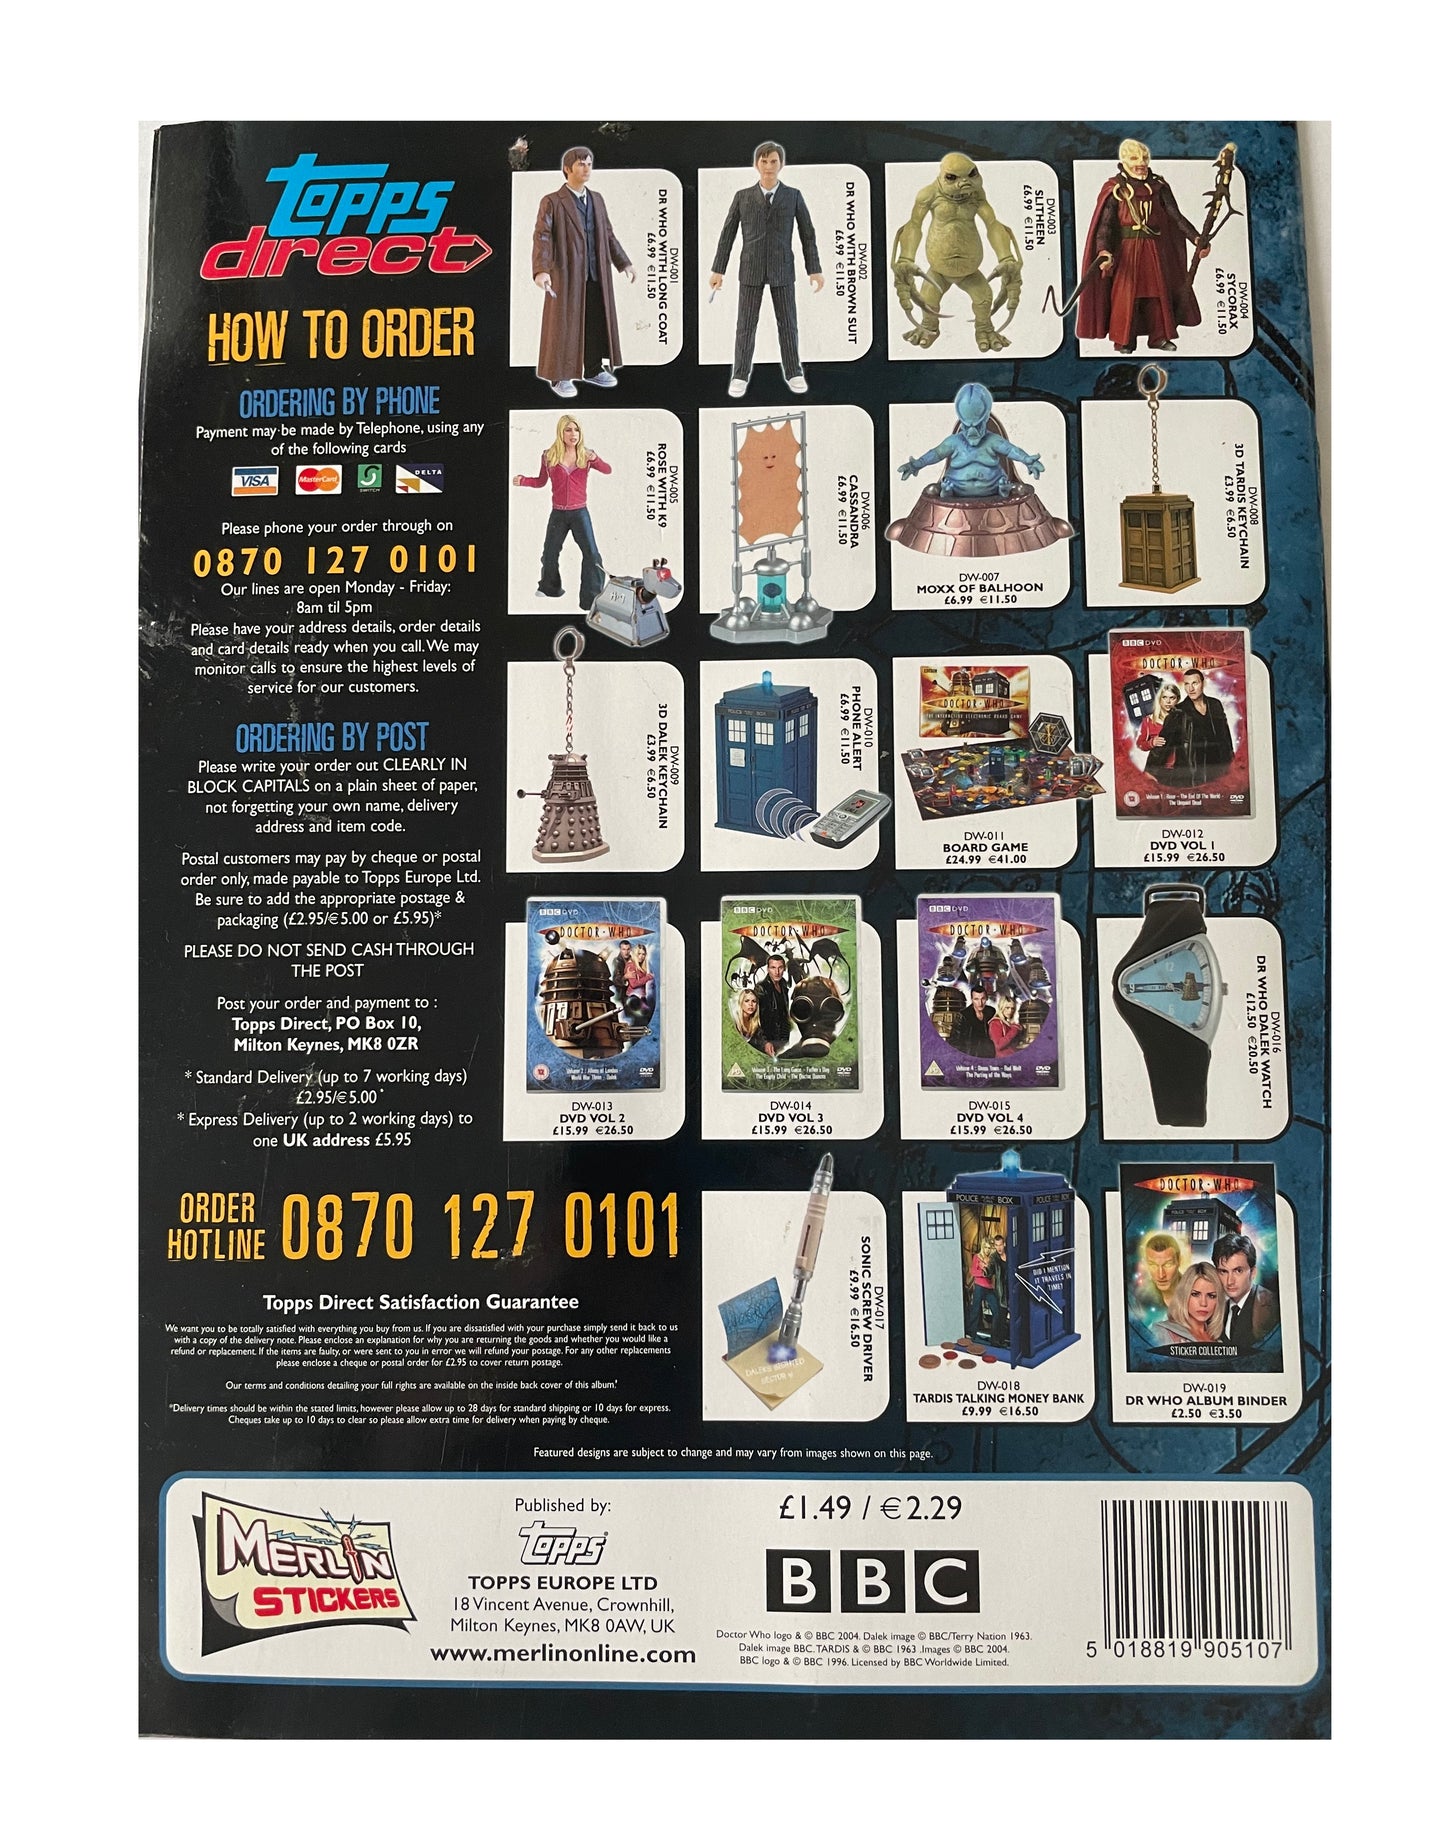 Vintage Doctor Dr Who Sticker Collection Sticker Album Book By Merlin 2004 With 161 Stickers Attached